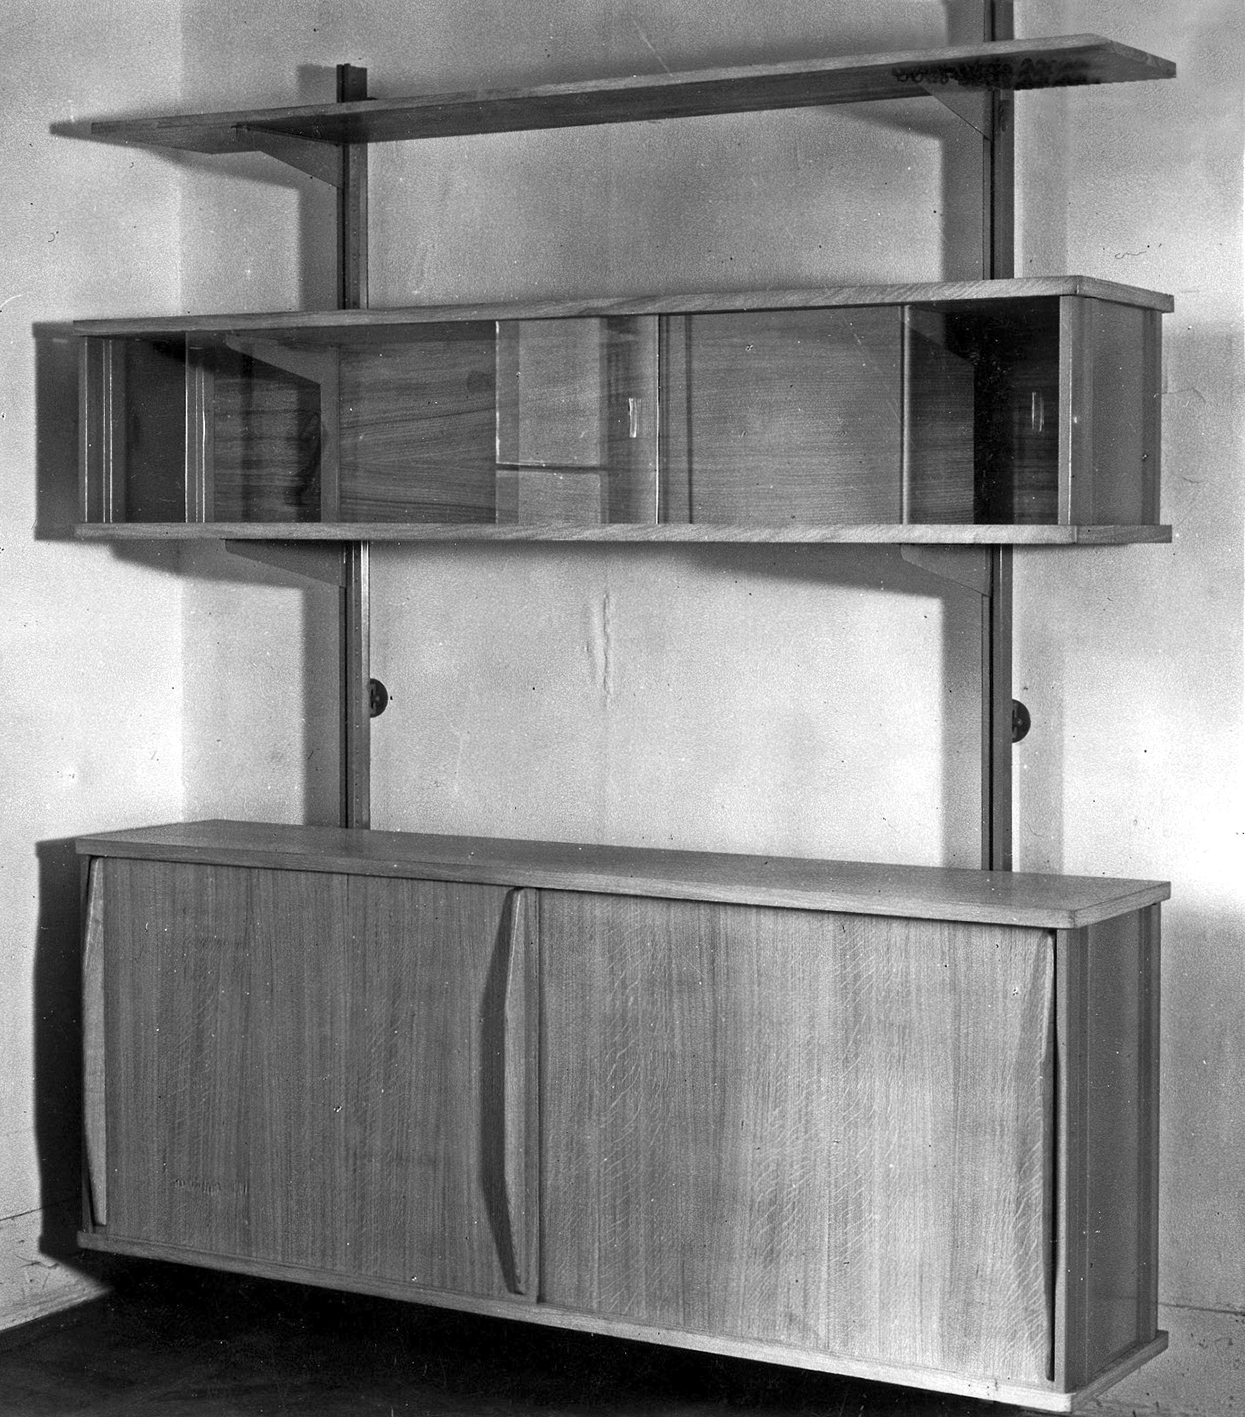 Wall fixture. Support-channel and bracket system equipped with a standard cabinet, a small cabinet and a shelf. Exhibition model, ca. 1947.